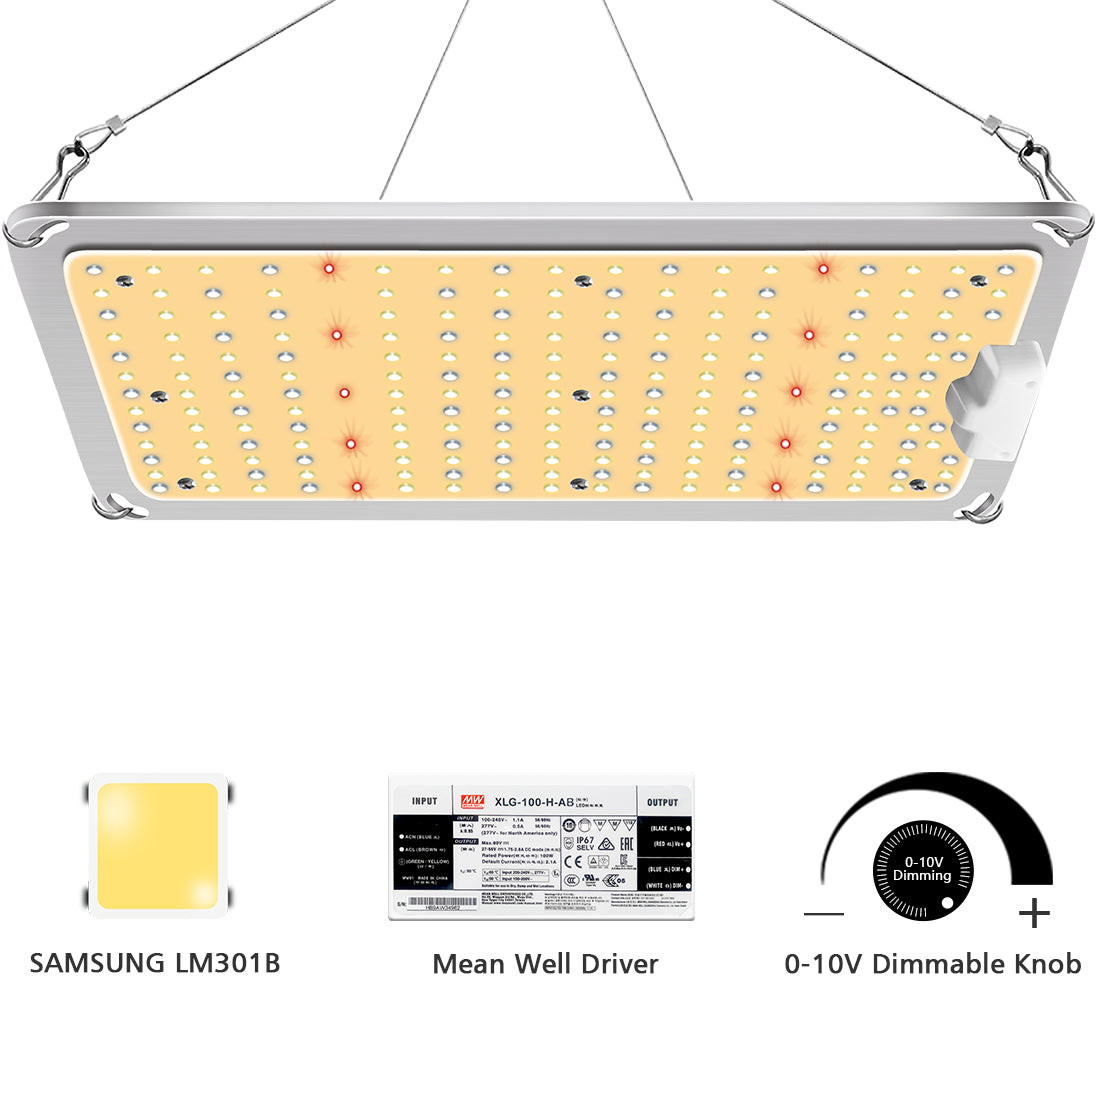 LED Grow Light GL1000 with Samsung LM301 Diodes & MeanWell Driver, 110W Sunlike Full Spectrum for Hydroponic Indoor Plants Veg&Flowering